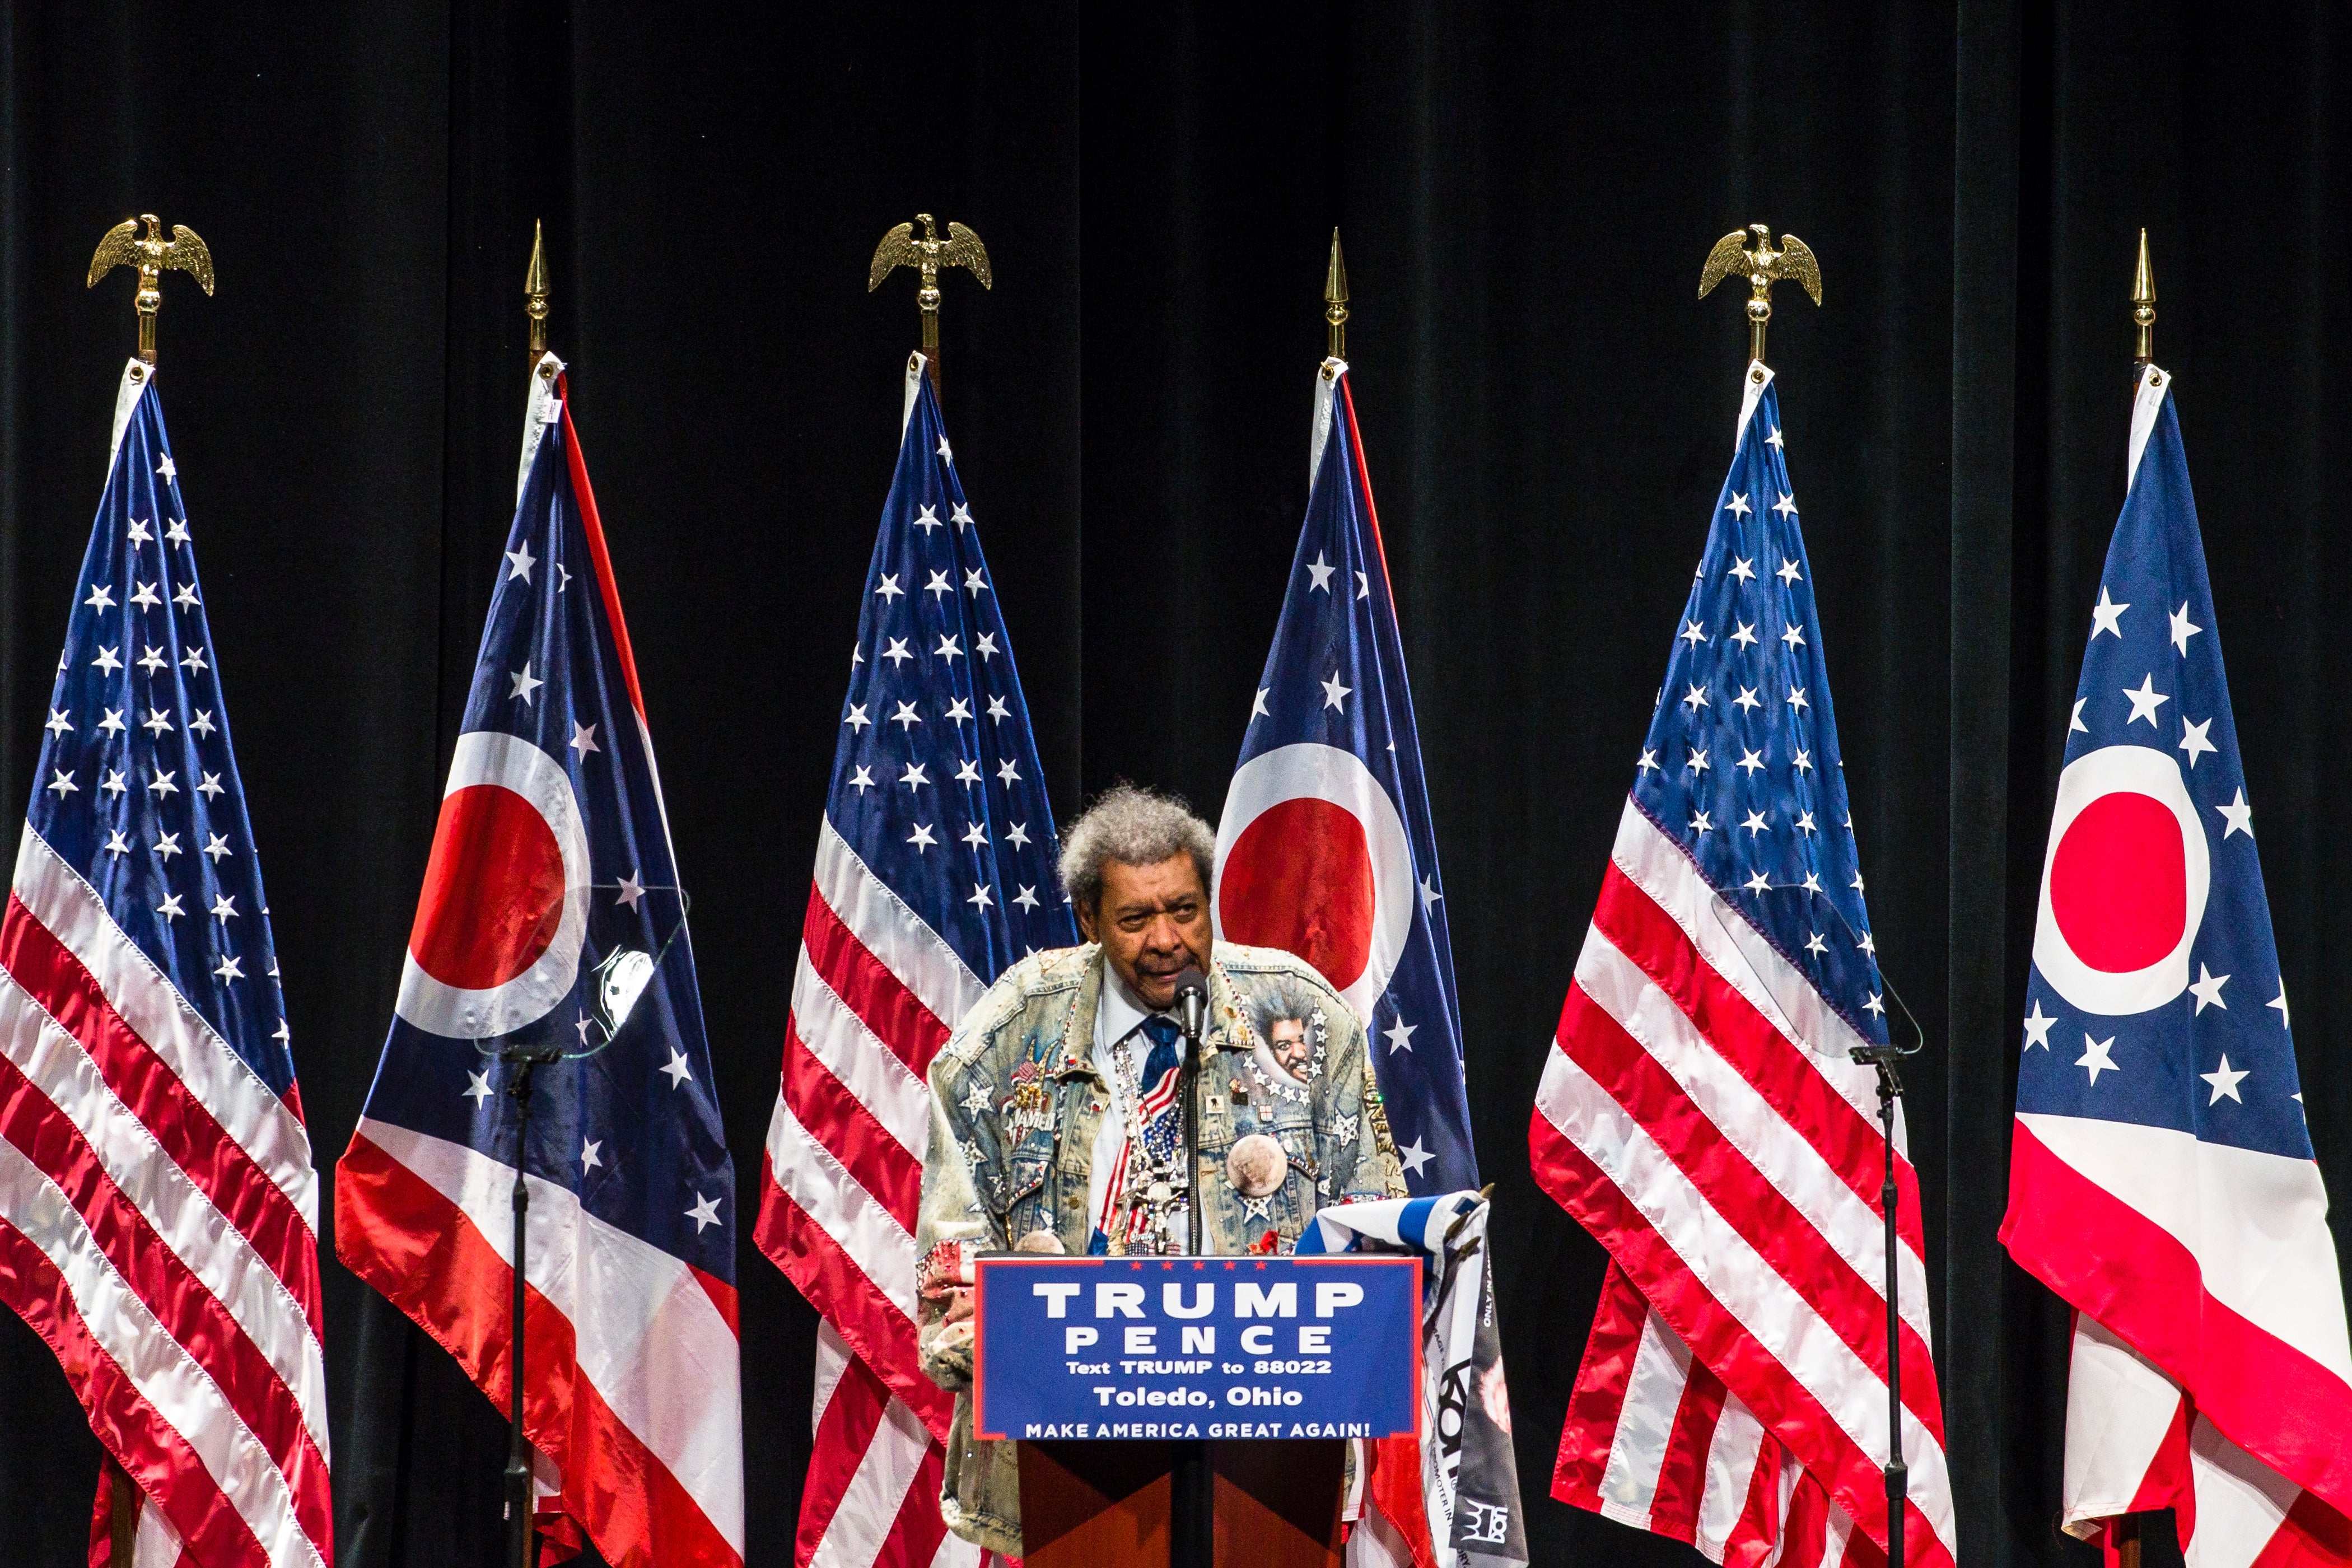 Boxing Promoter Don King Uses N-Word To Introduce Donald Trump During Church Visit
